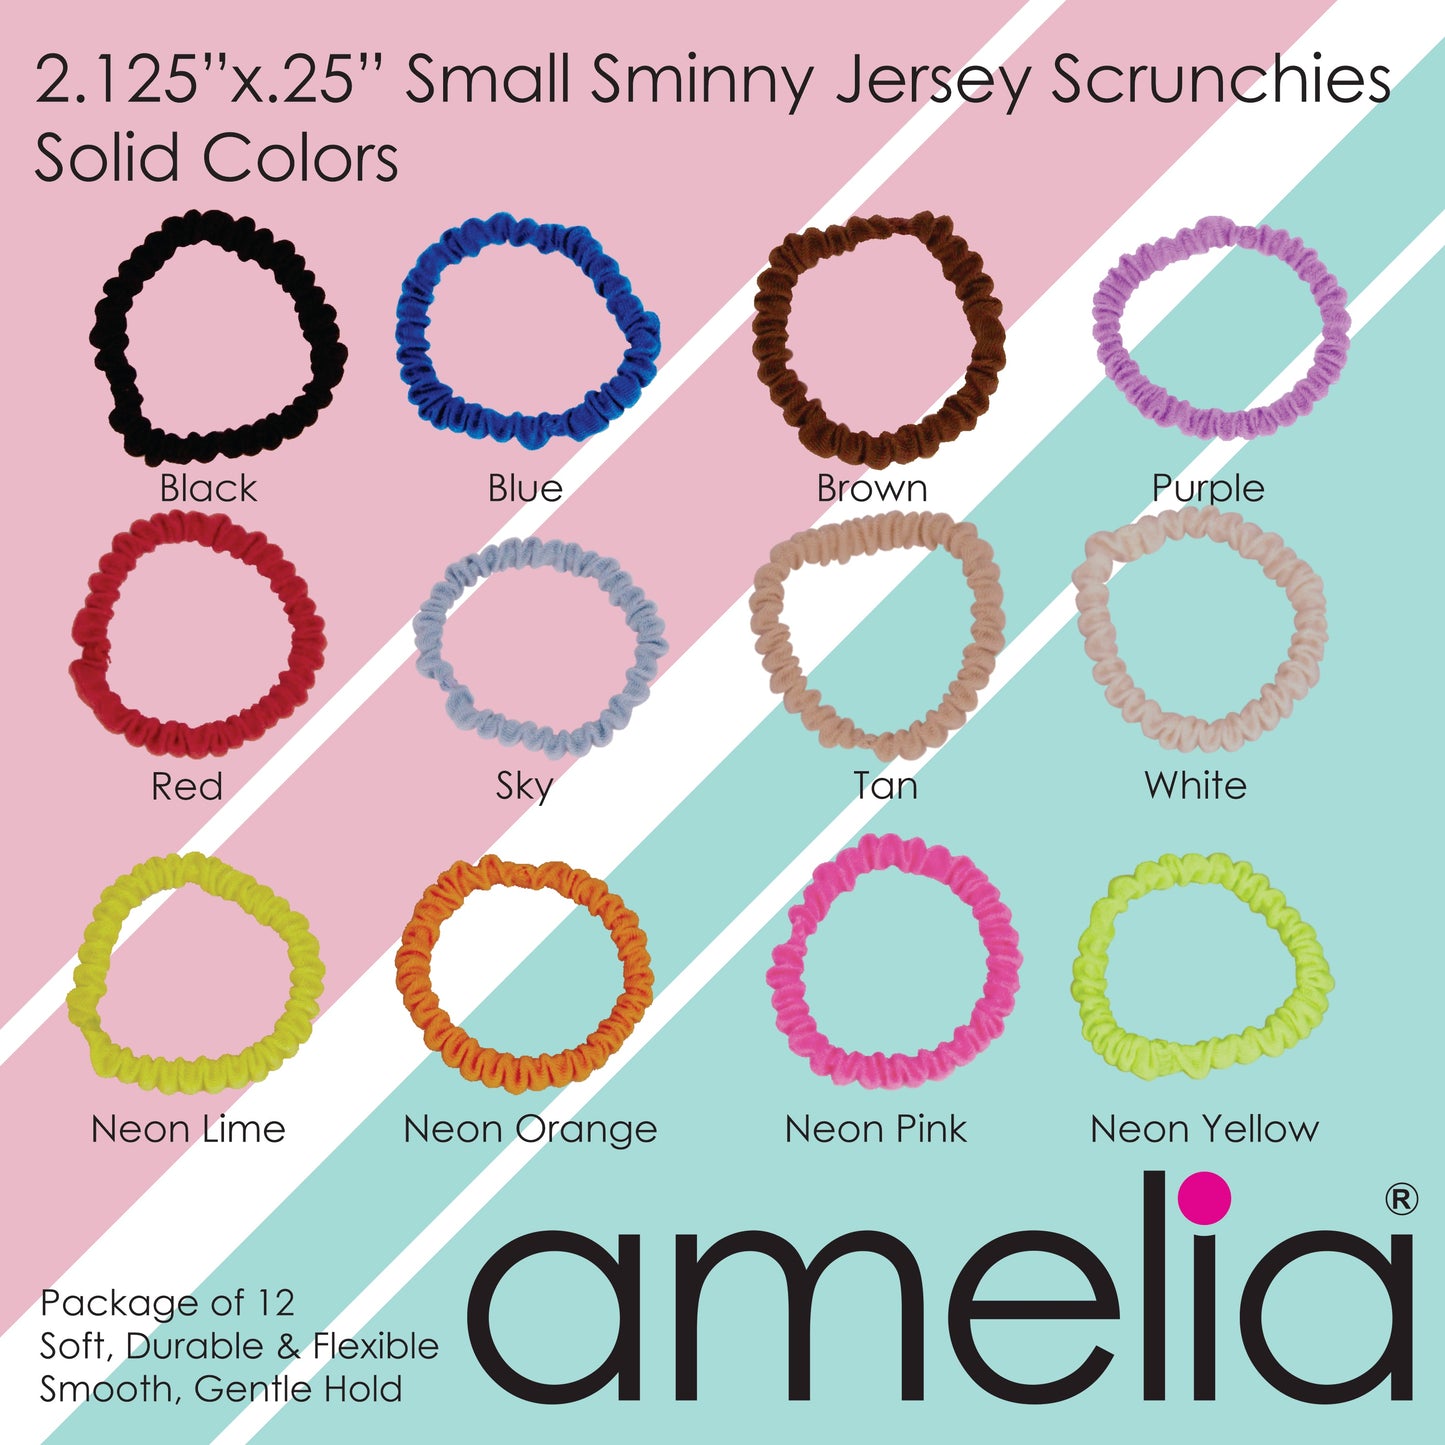 Amelia Beauty, Polka Dot Mix Skinny Jersey Scrunchies, 2.125in Diameter, Gentle on Hair, Strong Hold, No Snag, No Dents or Creases. 12 Pack